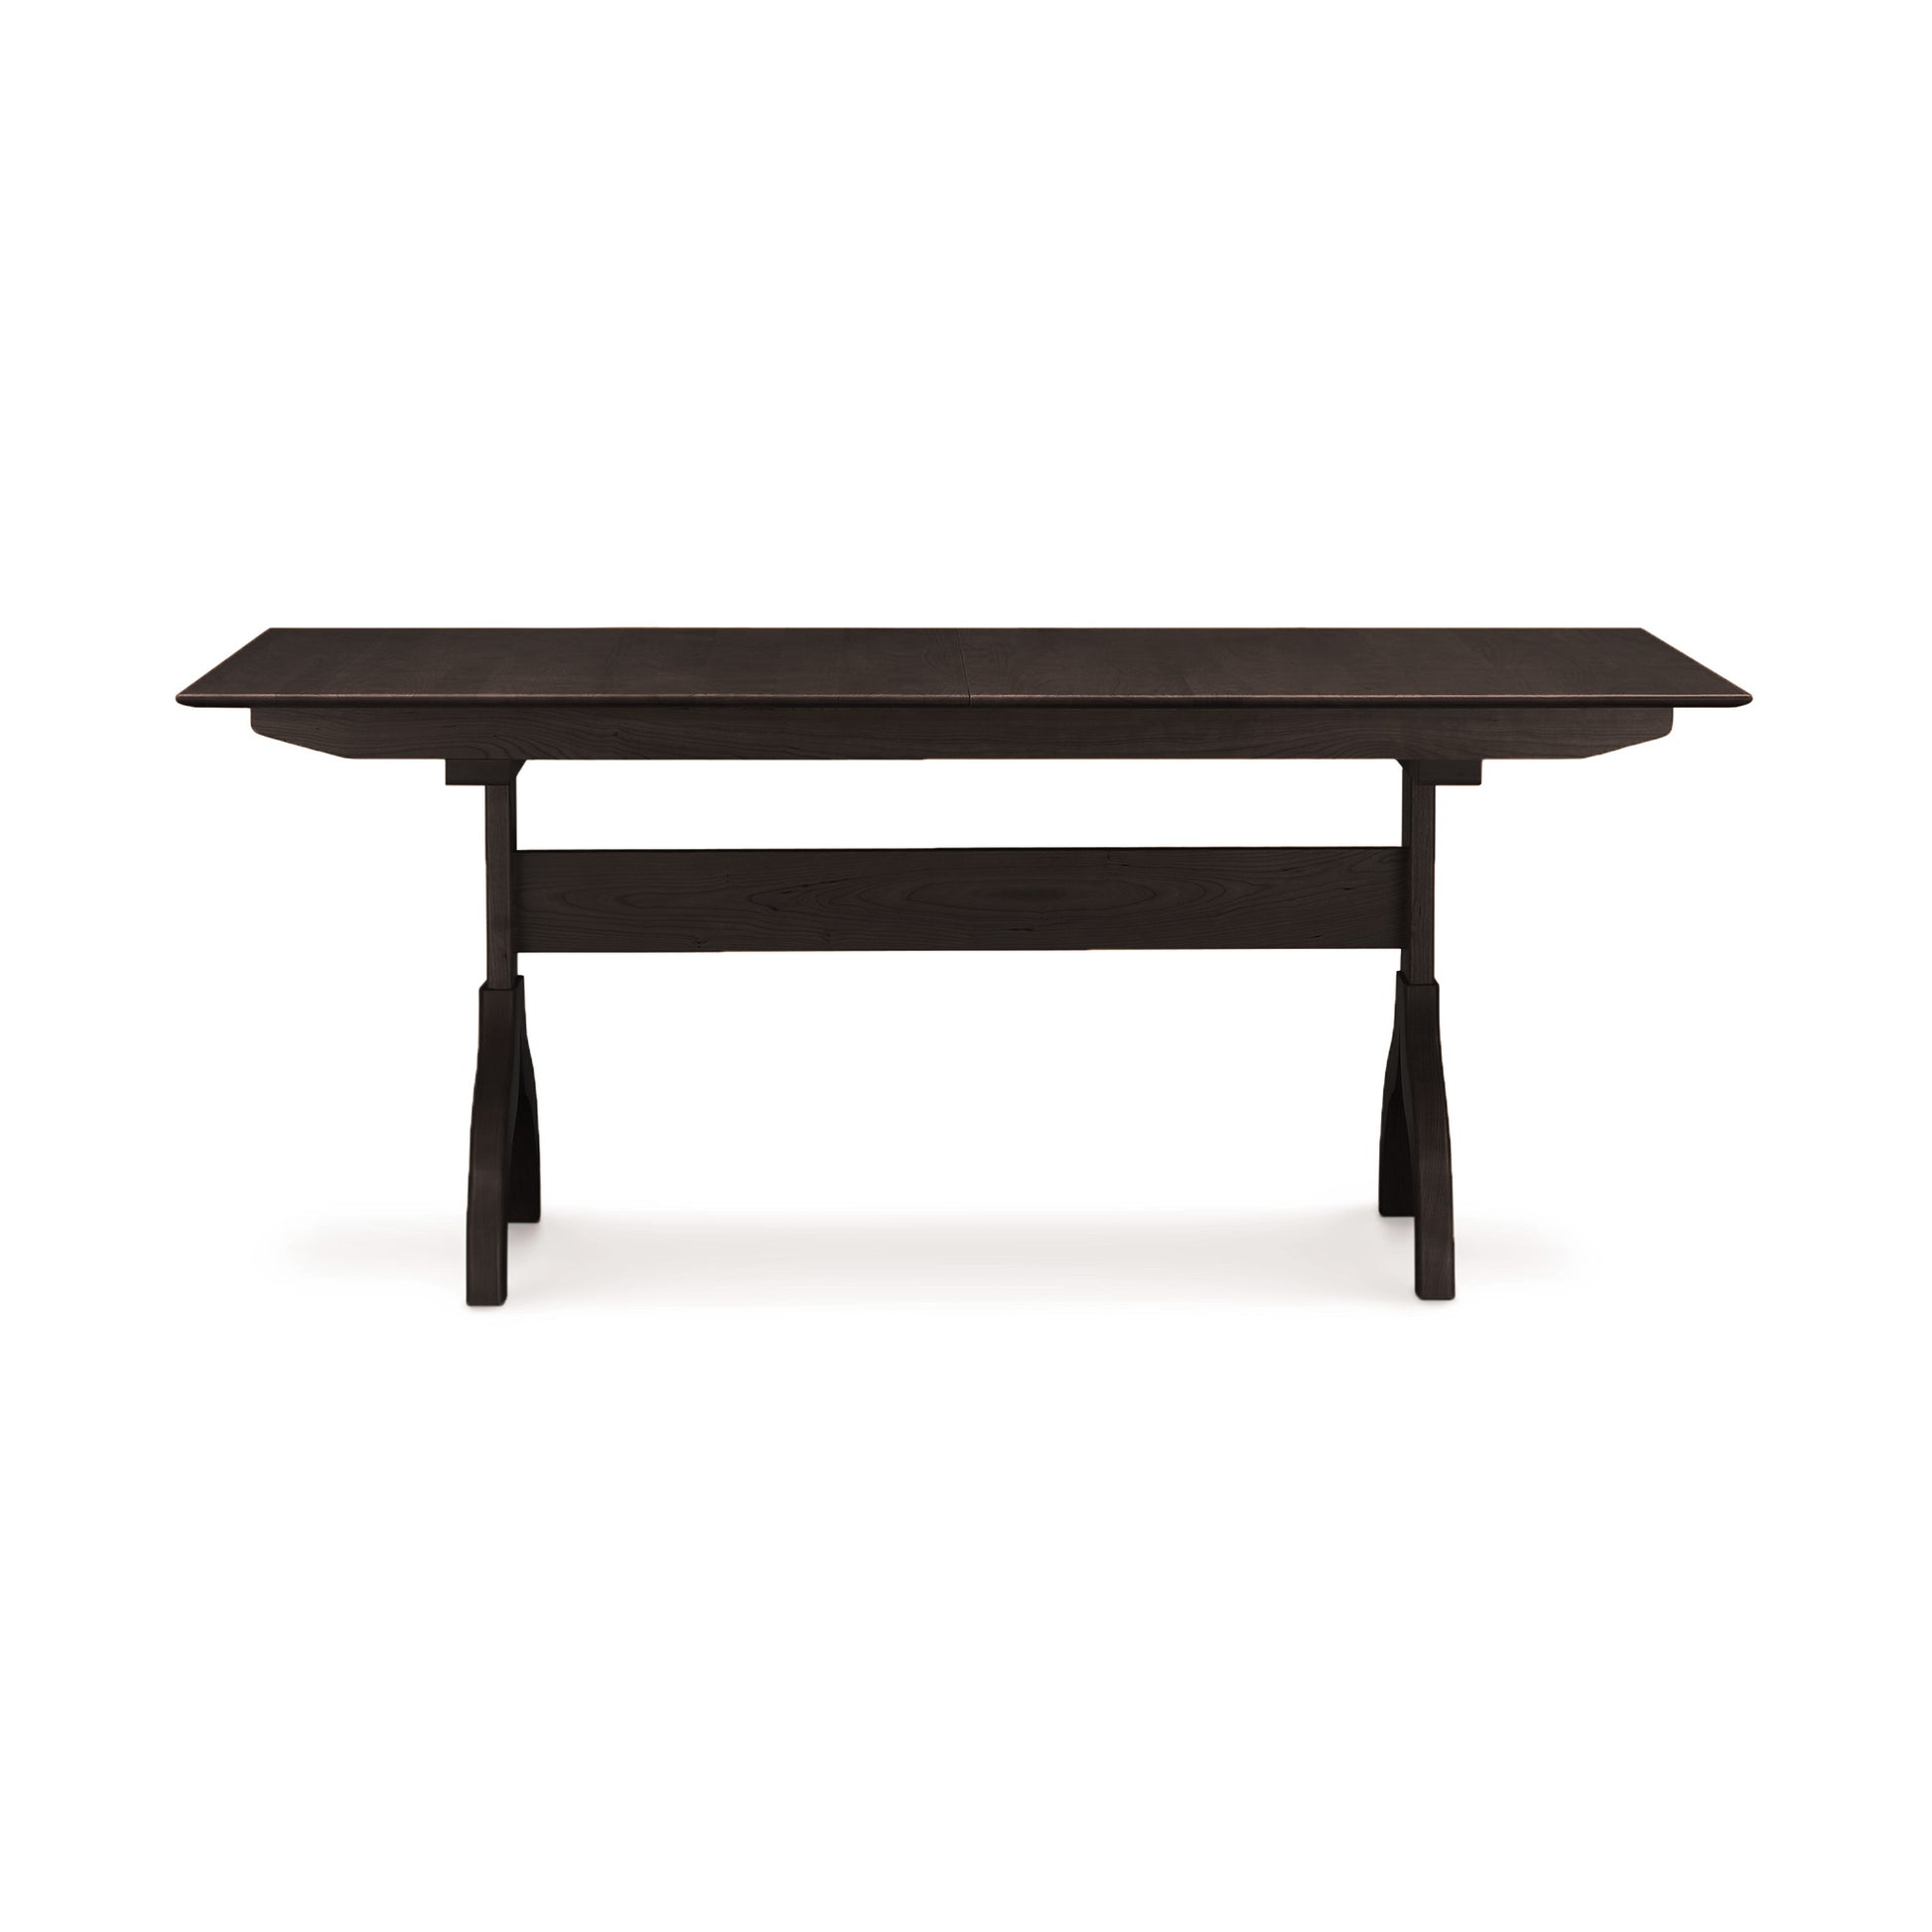 A plain, rectangular wooden Sarah Shaker Trestle Extension Table from the Copeland Furniture Collection, with a dark finish and simple legs, presented against a white background.